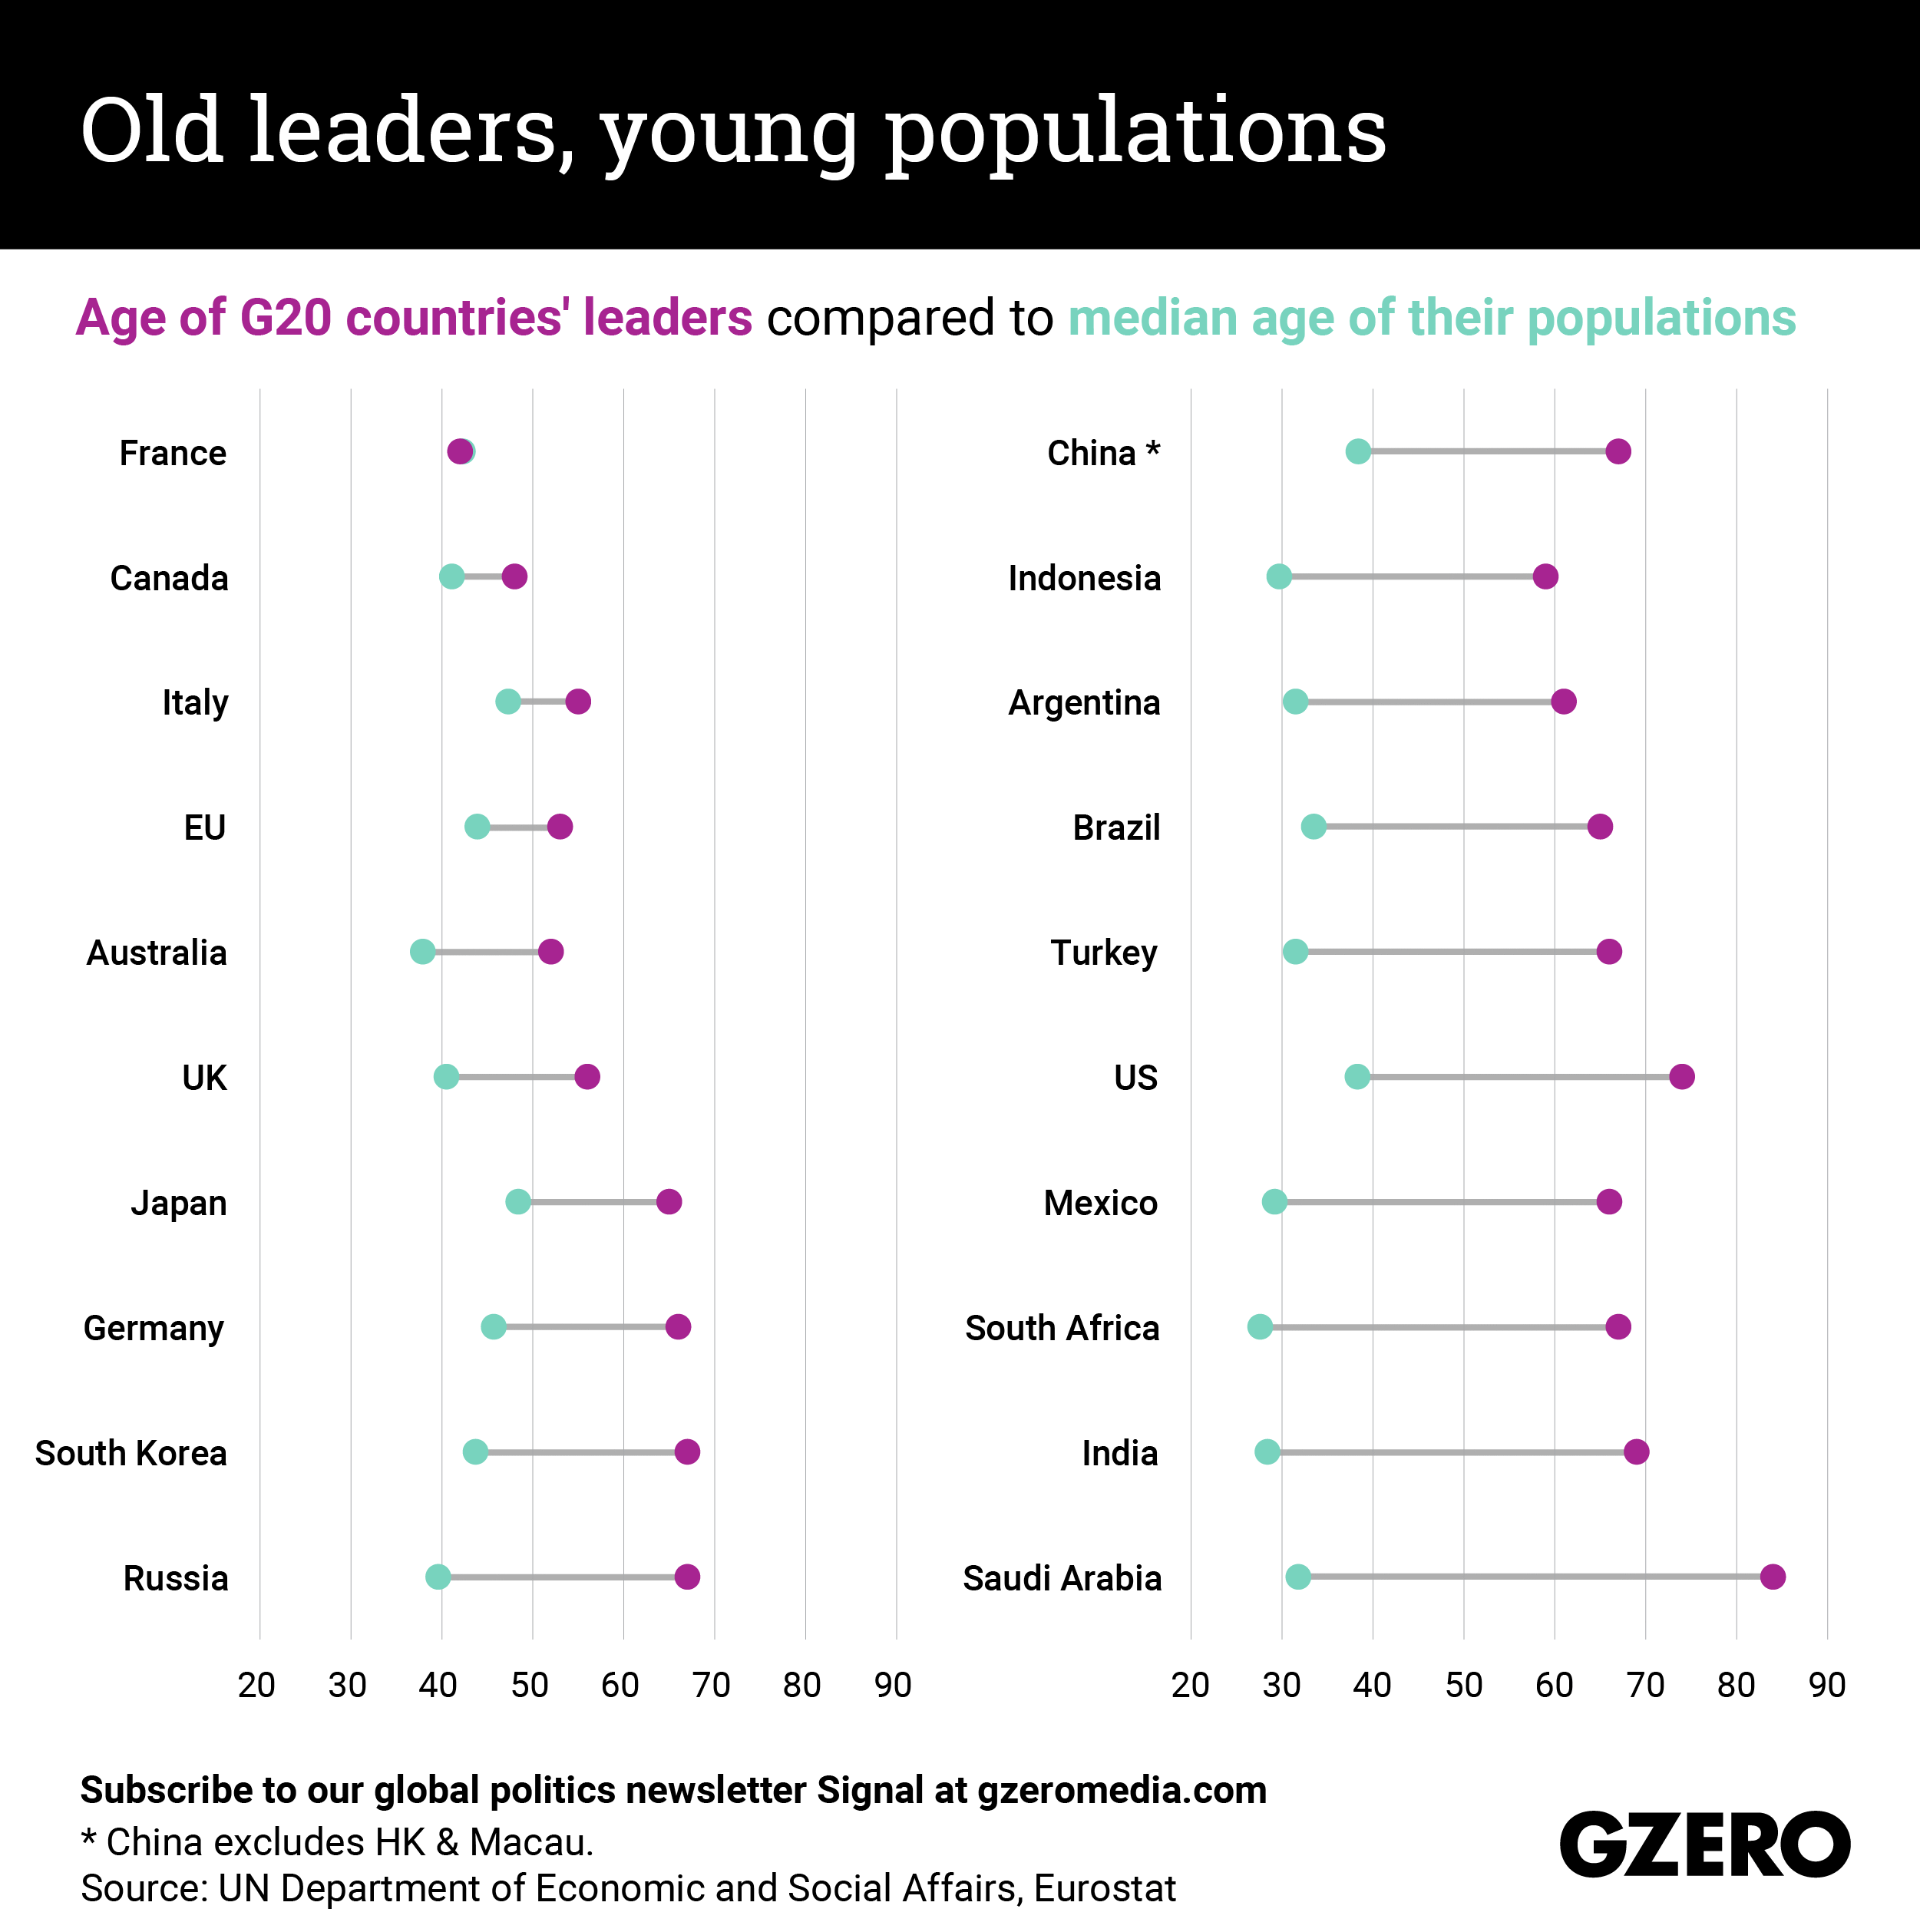 The Graphic Truth: Old leaders, young populations